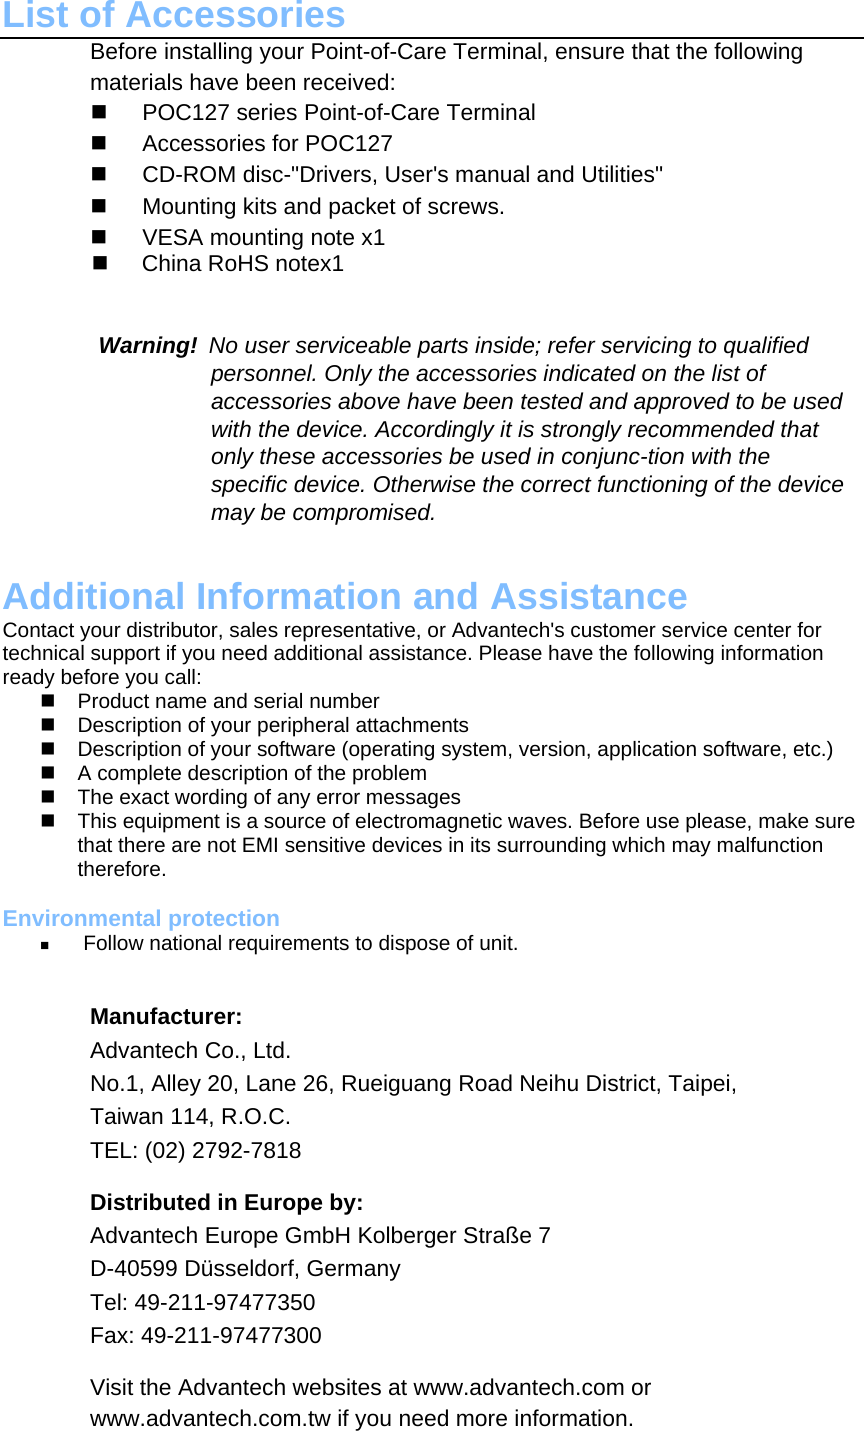 List of Accessories Before installing your Point-of-Care Terminal, ensure that the following materials have been received:    POC127 series Point-of-Care Terminal     Accessories for POC127     CD-ROM disc-&quot;Drivers, User&apos;s manual and Utilities&quot;     Mounting kits and packet of screws.     VESA mounting note x1    China RoHS notex1 　     Warning! No user serviceable parts inside; refer servicing to qualified personnel. Only the accessories indicated on the list of accessories above have been tested and approved to be used with the device. Accordingly it is strongly recommended that only these accessories be used in conjunc-tion with the specific device. Otherwise the correct functioning of the device may be compromised.   Additional Information and Assistance Contact your distributor, sales representative, or Advantech&apos;s customer service center for technical support if you need additional assistance. Please have the following information ready before you call:   Product name and serial number   Description of your peripheral attachments   Description of your software (operating system, version, application software, etc.)   A complete description of the problem   The exact wording of any error messages   This equipment is a source of electromagnetic waves. Before use please, make sure that there are not EMI sensitive devices in its surrounding which may malfunction therefore.  Environmental protection   Follow national requirements to dispose of unit.   Manufacturer:  Advantech Co., Ltd.  No.1, Alley 20, Lane 26, Rueiguang Road Neihu District, Taipei,  Taiwan 114, R.O.C.  TEL: (02) 2792-7818  Distributed in Europe by:  Advantech Europe GmbH Kolberger Straße 7  D-40599 Düsseldorf, Germany  Tel: 49-211-97477350  Fax: 49-211-97477300  Visit the Advantech websites at www.advantech.com or www.advantech.com.tw if you need more information.    